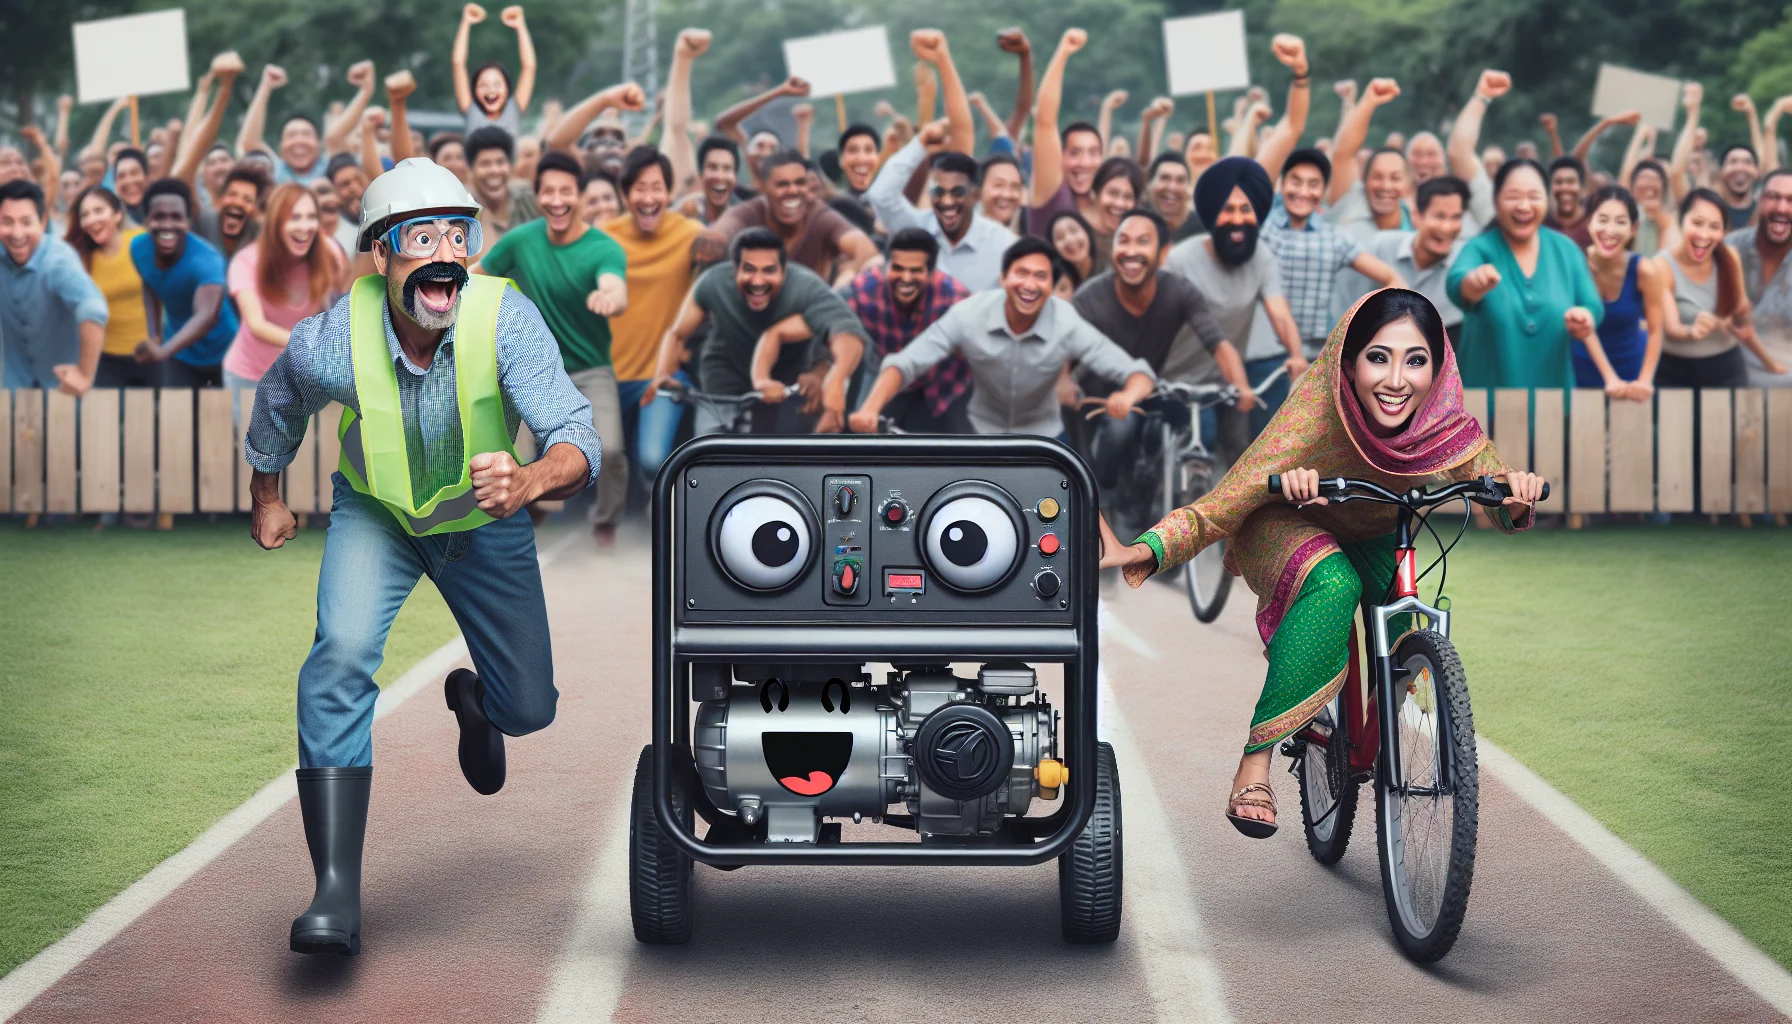 Create an amusing and lifelike scene with a portable diesel generator. Picture a middle-aged Hispanic man, wearing safety gear, playfully racing against a South Asian woman on a bicycle, both trying to produce electricity fast. In the background, a crowd of diverse people, each from different descents, cheering for both. The generator has comic eyes and a smile, personifying it as another competitor. The surroundings should reflect a friendly competition taking place in an open park, enhancing the sense of a community coming together for a fun challenge.